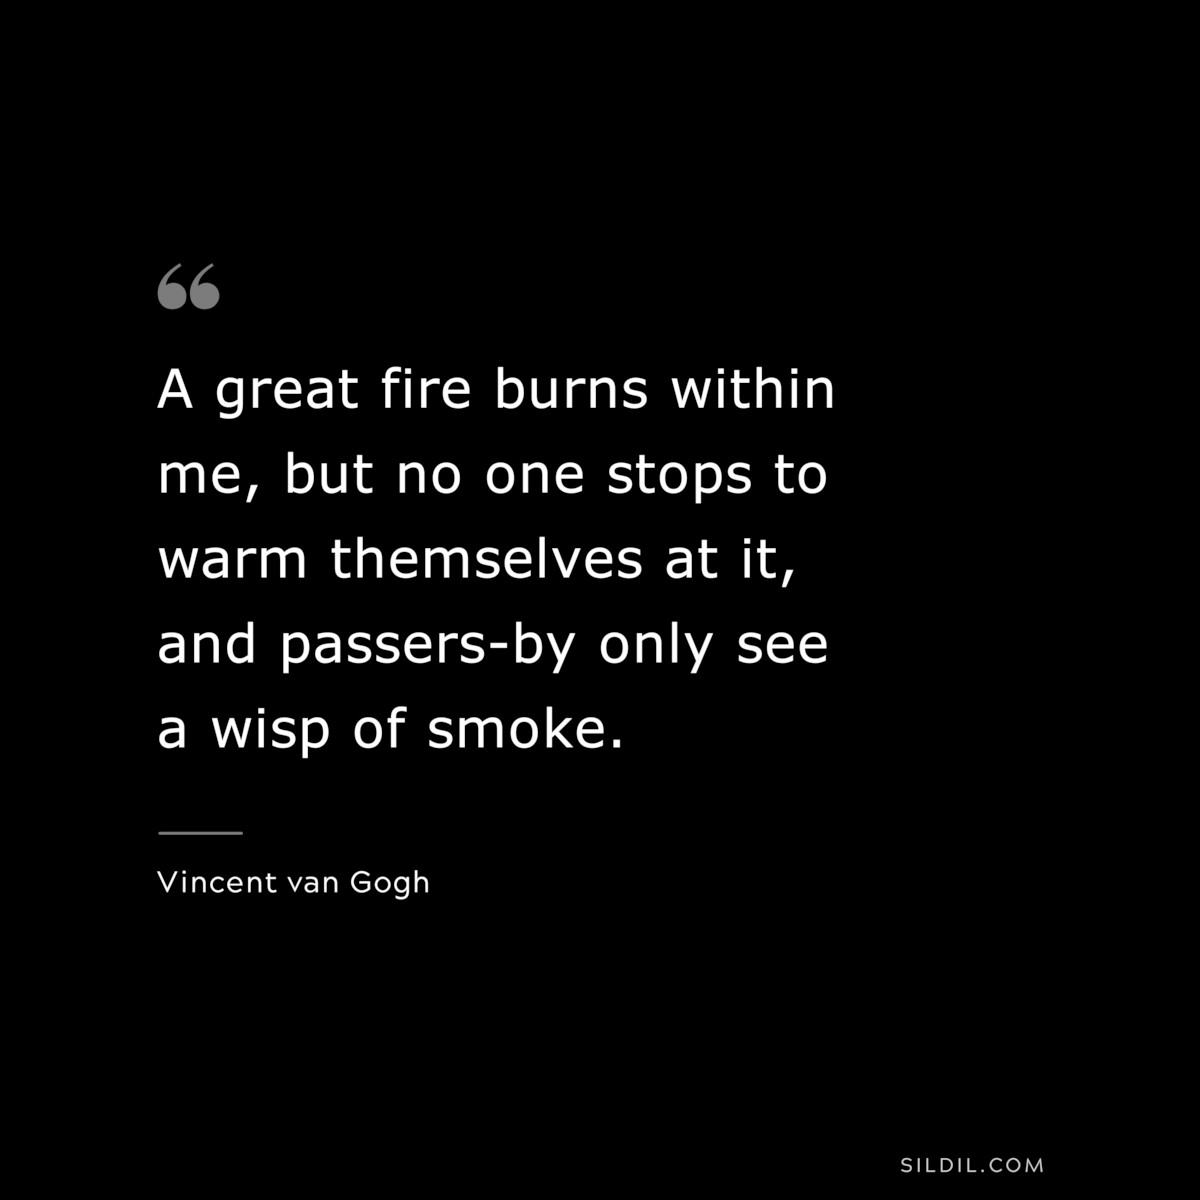 A great fire burns within me, but no one stops to warm themselves at it, and passers-by only see a wisp of smoke. ― Vincent van Gogh